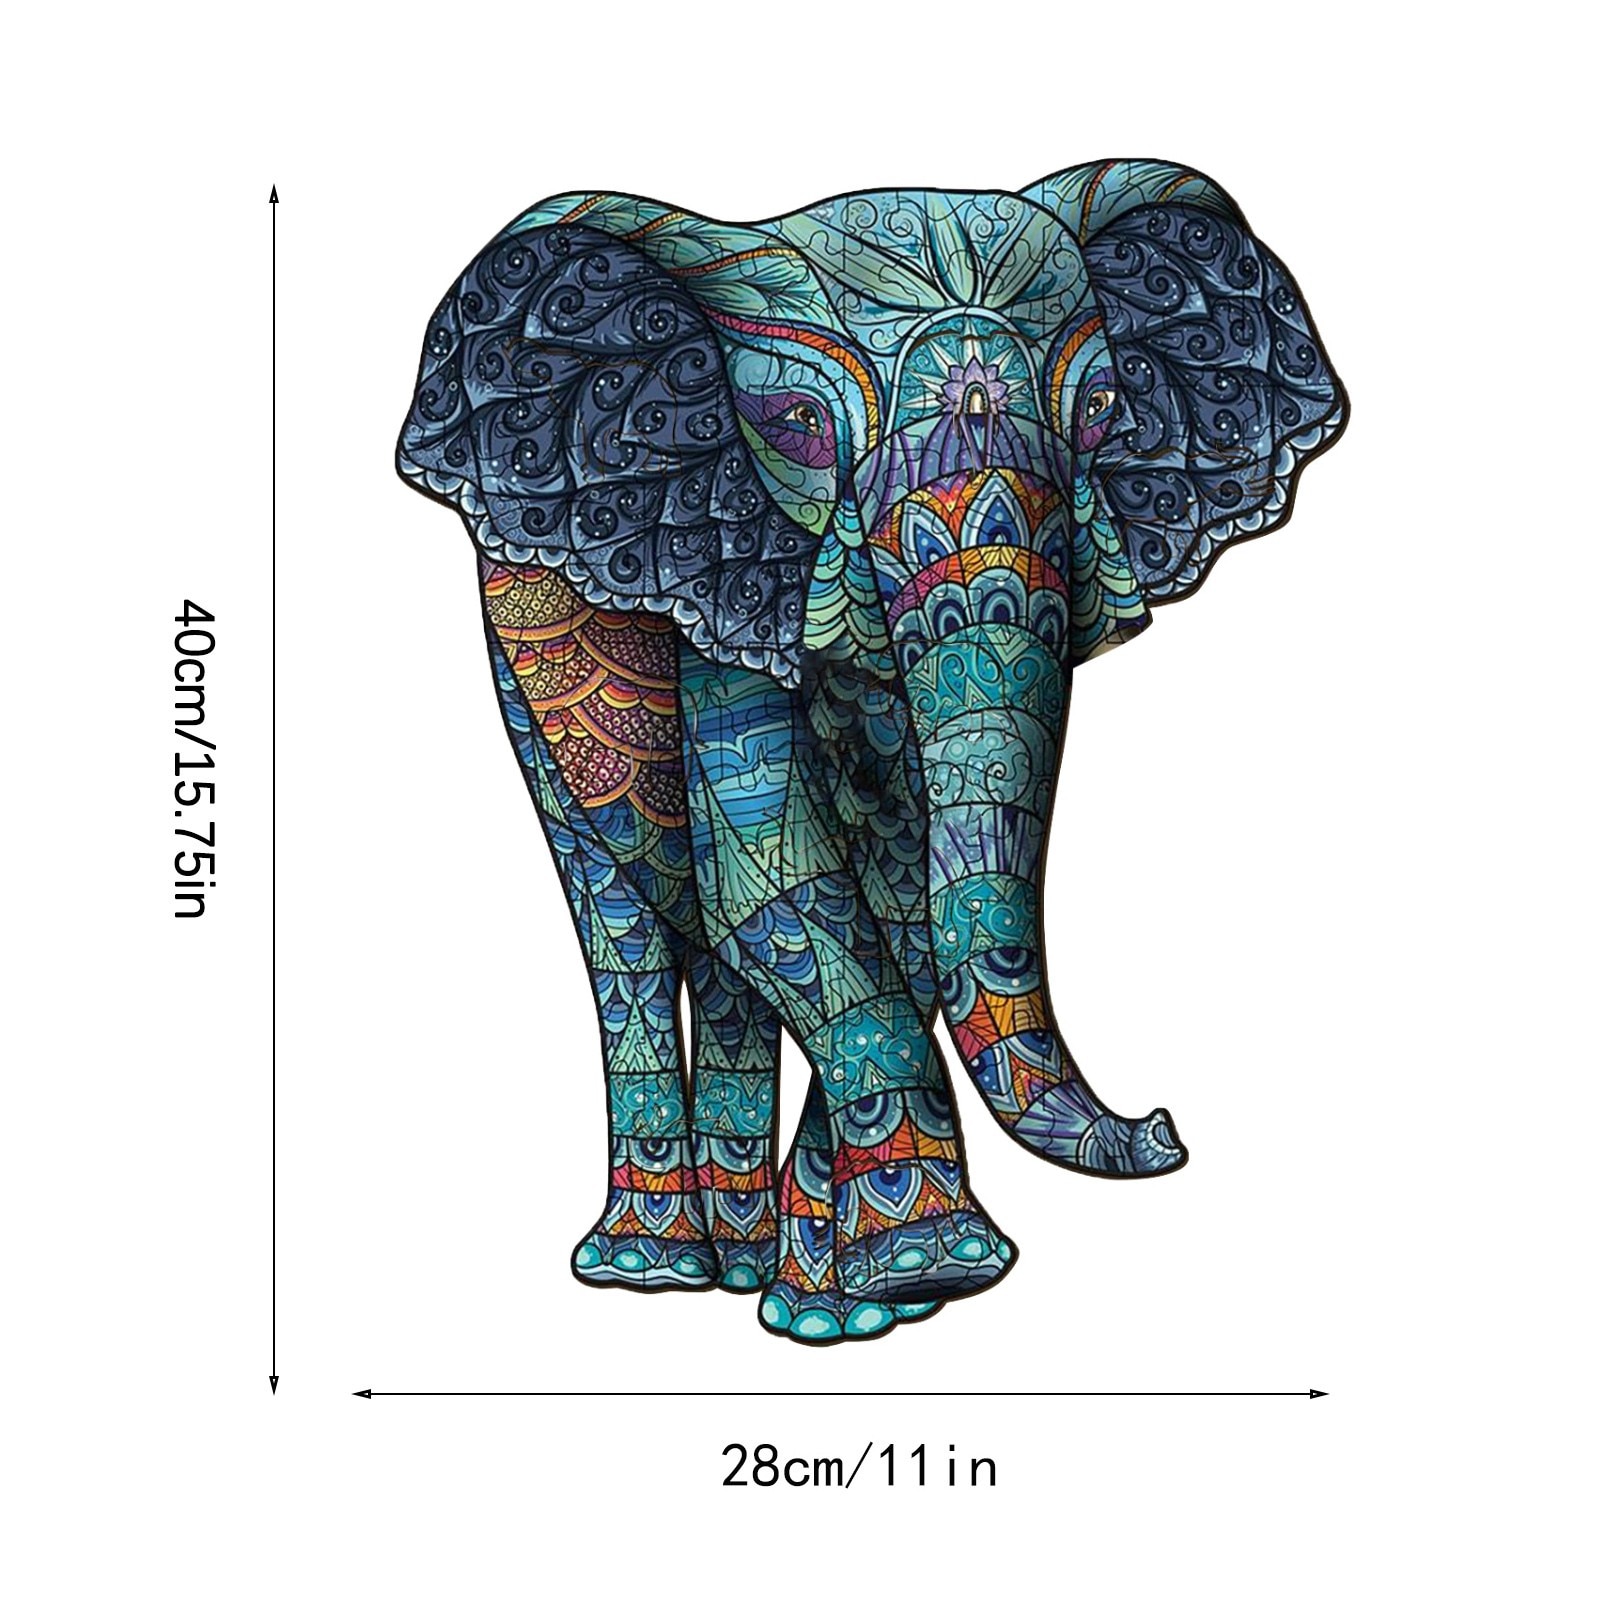 3000 Pieces Animal Jigsaw Puzzles for Adults-Colored Elephants-Large Puzzle Game Toys Gift Creativity Decompression Decorative Puzzle Cool and Challenge Art Picture